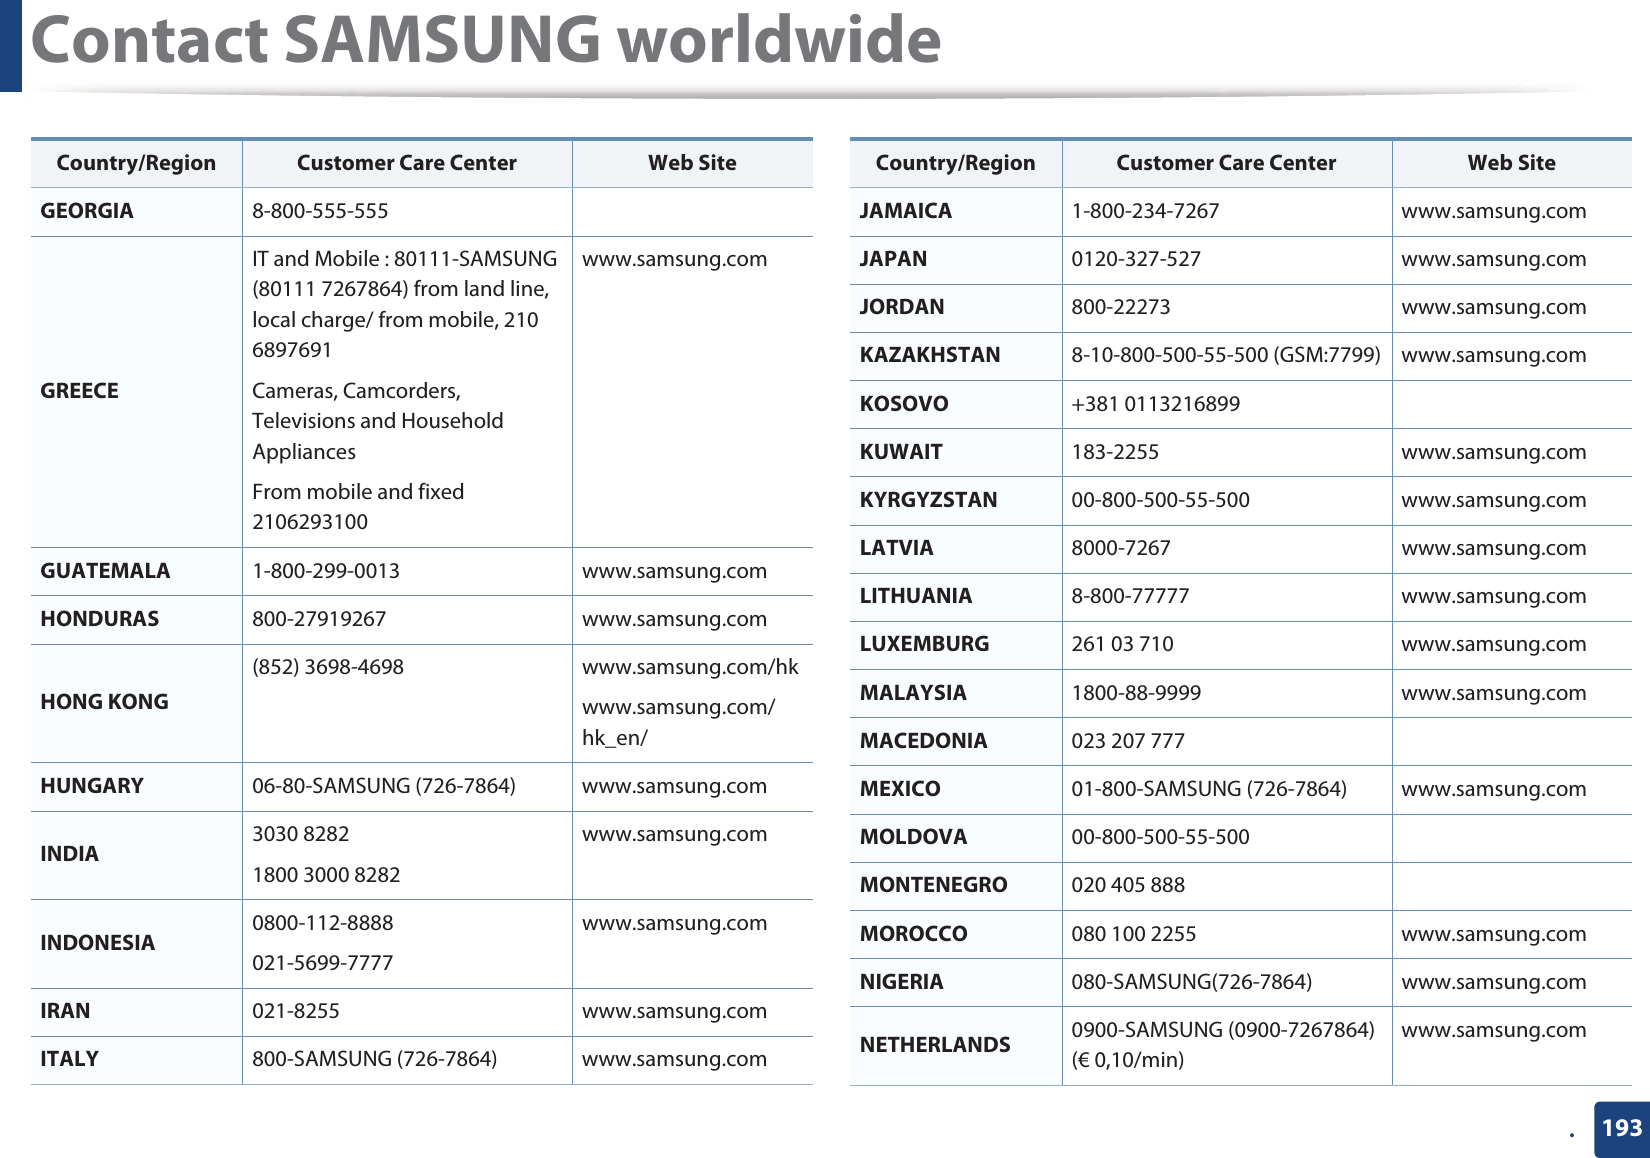 Contact SAMSUNG worldwide193.GEORGIA 8-800-555-555GREECEIT and Mobile : 80111-SAMSUNG (80111 7267864) from land line, local charge/ from mobile, 210 6897691 Cameras, Camcorders, Televisions and Household AppliancesFrom mobile and fixed 2106293100www.samsung.comGUATEMALA 1-800-299-0013 www.samsung.comHONDURAS 800-27919267 www.samsung.comHONG KONG(852) 3698-4698 www.samsung.com/hkwww.samsung.com/hk_en/HUNGARY 06-80-SAMSUNG (726-7864) www.samsung.comINDIA 3030 82821800 3000 8282 www.samsung.comINDONESIA 0800-112-8888021-5699-7777www.samsung.comIRAN 021-8255 www.samsung.comITALY 800-SAMSUNG (726-7864) www.samsung.comCountry/Region Customer Care Center  Web SiteJAMAICA 1-800-234-7267 www.samsung.comJAPAN 0120-327-527 www.samsung.comJORDAN 800-22273 www.samsung.comKAZAKHSTAN 8-10-800-500-55-500 (GSM:7799) www.samsung.comKOSOVO +381 0113216899KUWAIT 183-2255 www.samsung.comKYRGYZSTAN 00-800-500-55-500 www.samsung.comLATVIA 8000-7267 www.samsung.comLITHUANIA 8-800-77777 www.samsung.comLUXEMBURG 261 03 710 www.samsung.comMALAYSIA 1800-88-9999 www.samsung.comMACEDONIA 023 207 777MEXICO 01-800-SAMSUNG (726-7864) www.samsung.comMOLDOVA 00-800-500-55-500MONTENEGRO 020 405 888MOROCCO 080 100 2255 www.samsung.comNIGERIA 080-SAMSUNG(726-7864) www.samsung.comNETHERLANDS 0900-SAMSUNG (0900-7267864) (€ 0,10/min)www.samsung.comCountry/Region Customer Care Center  Web Site